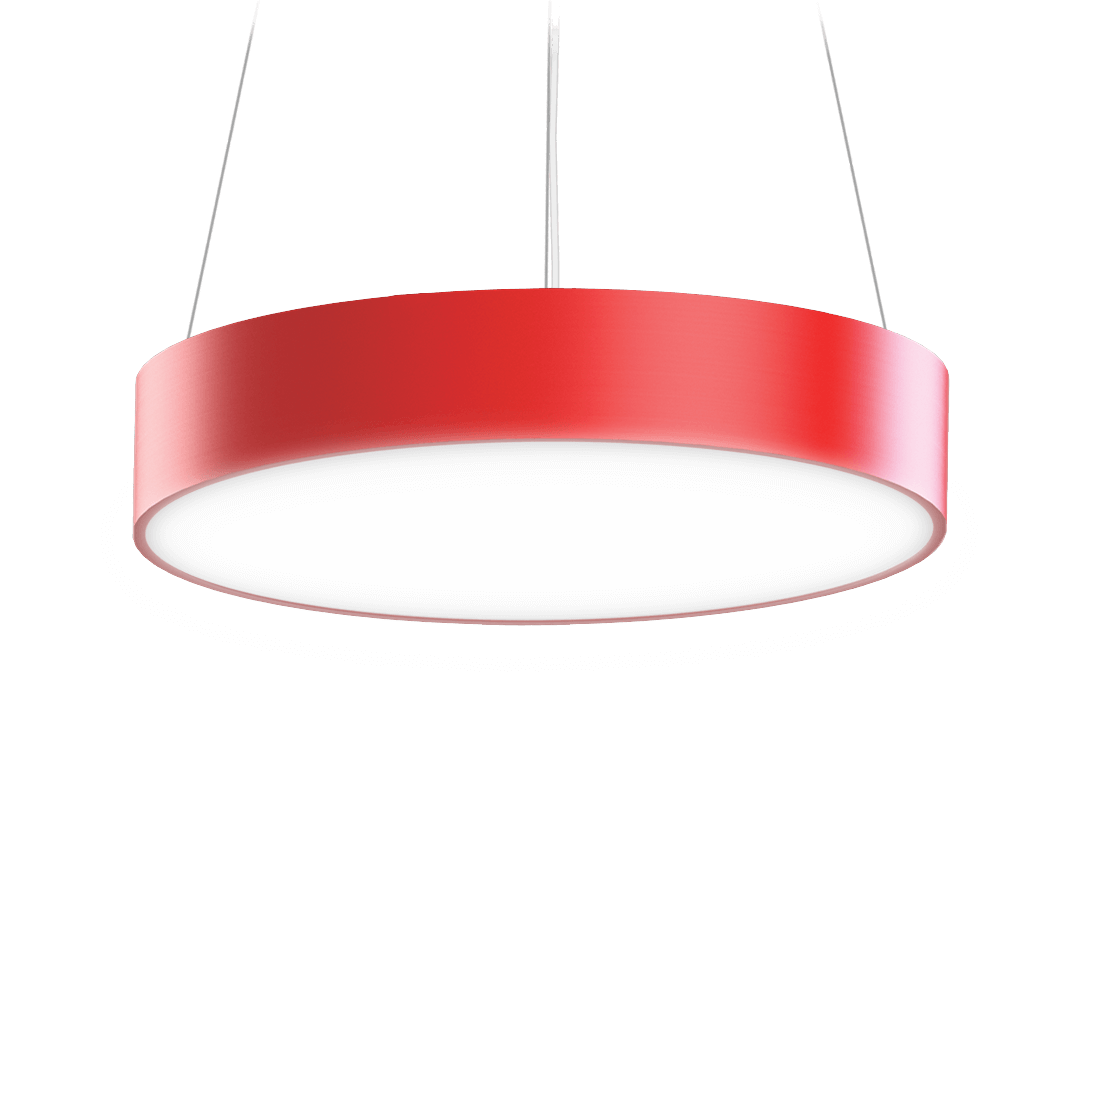 Red circular pendant style LED light fixture